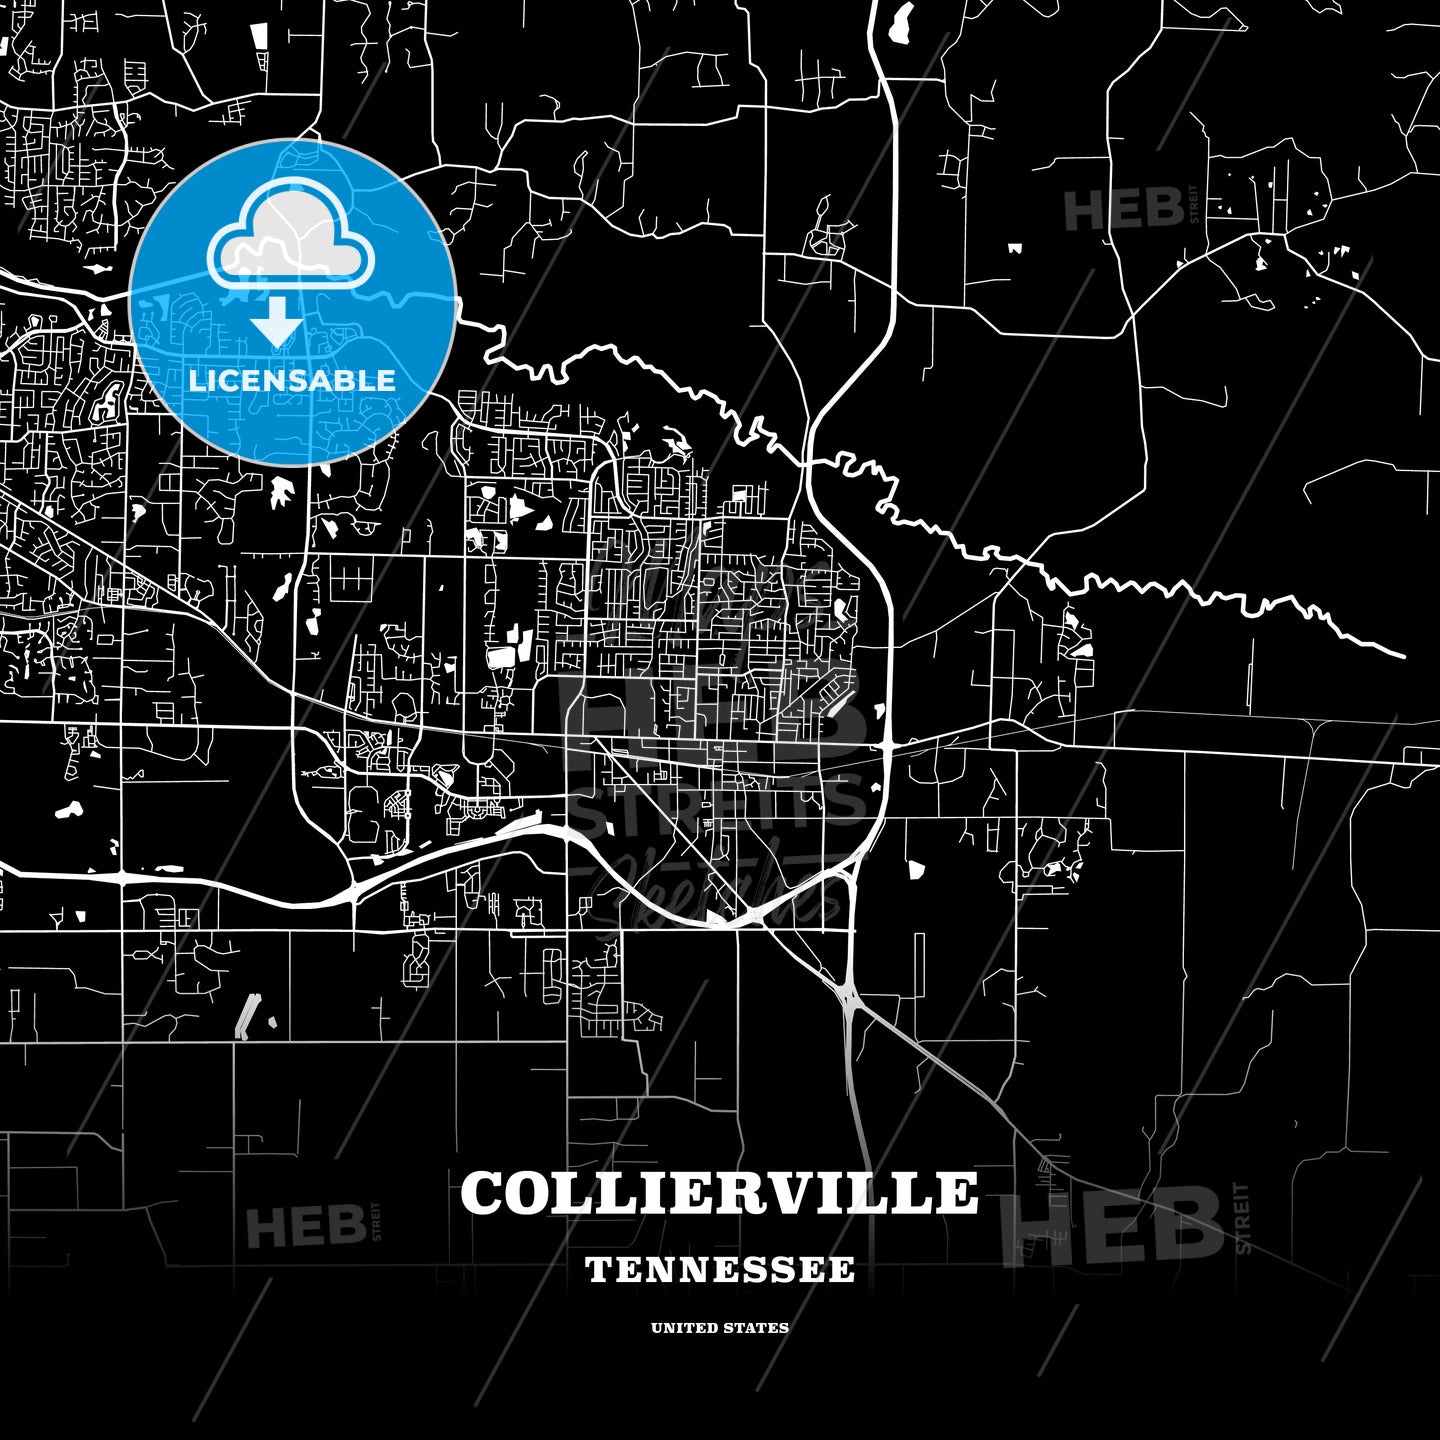 Collierville, Tennessee, USA map